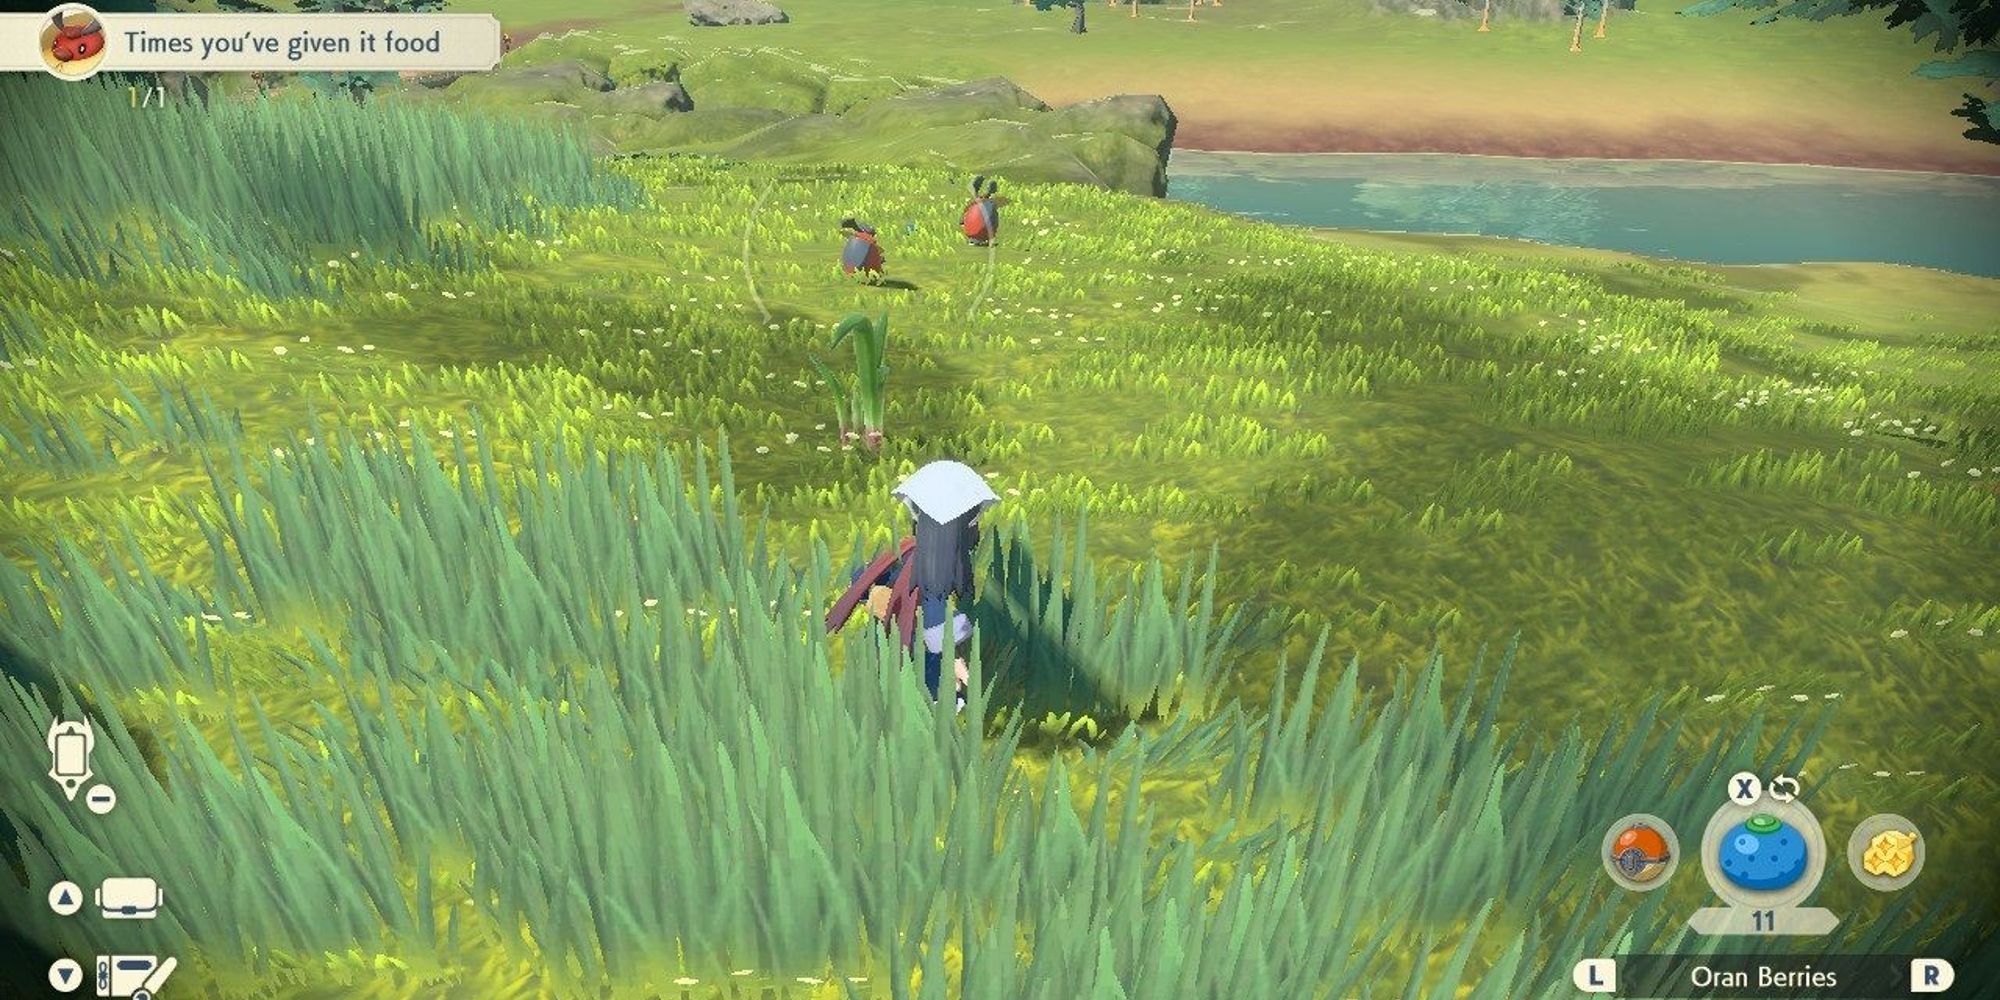 player hiding in grass after throwing an oran berry